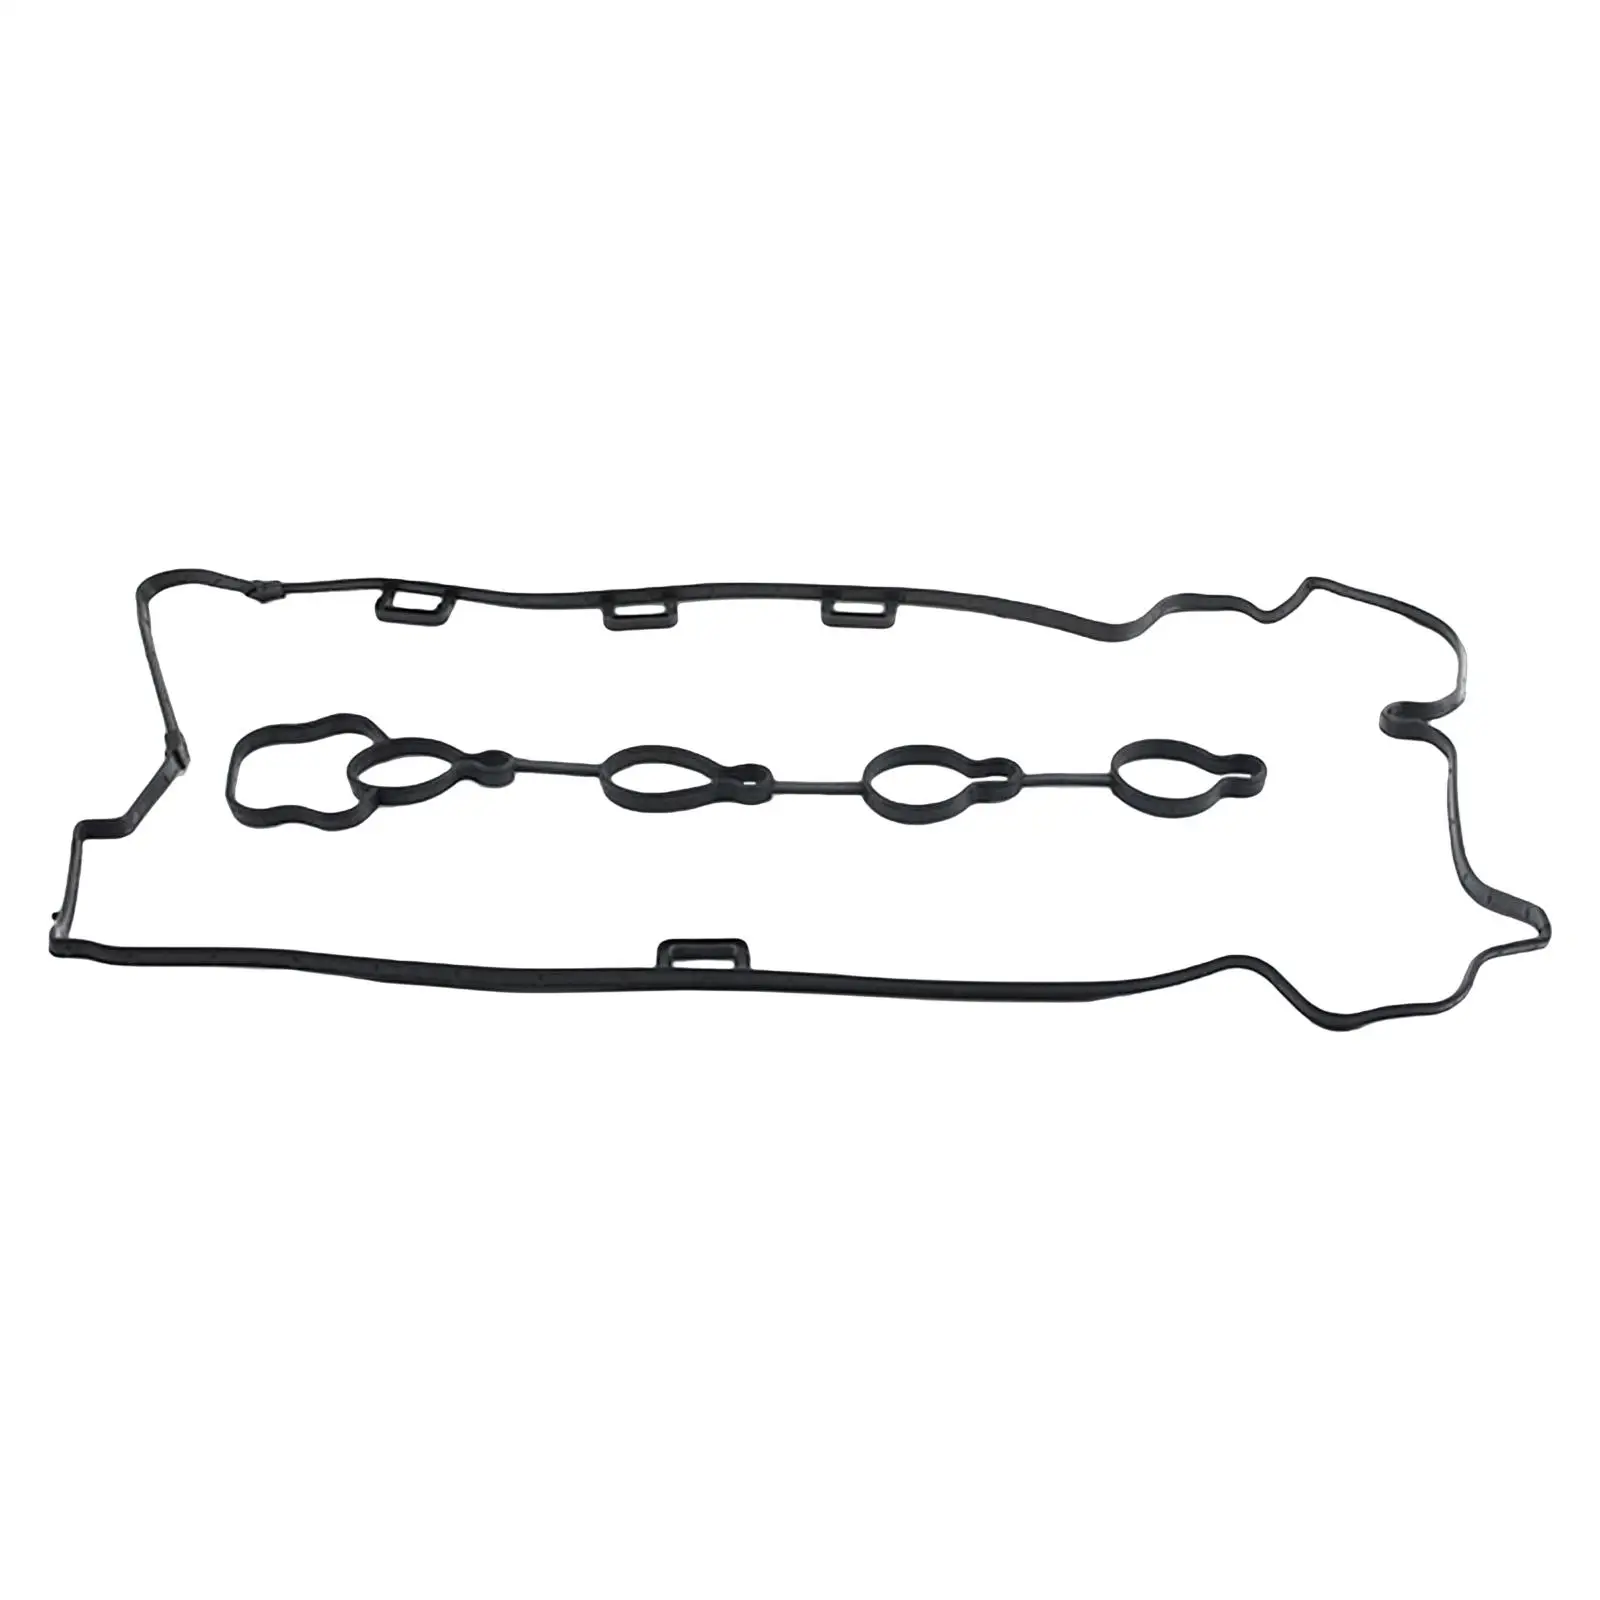  Set Engine Cover Gasket   Rubber Pad for 2609291, for 2.4608604